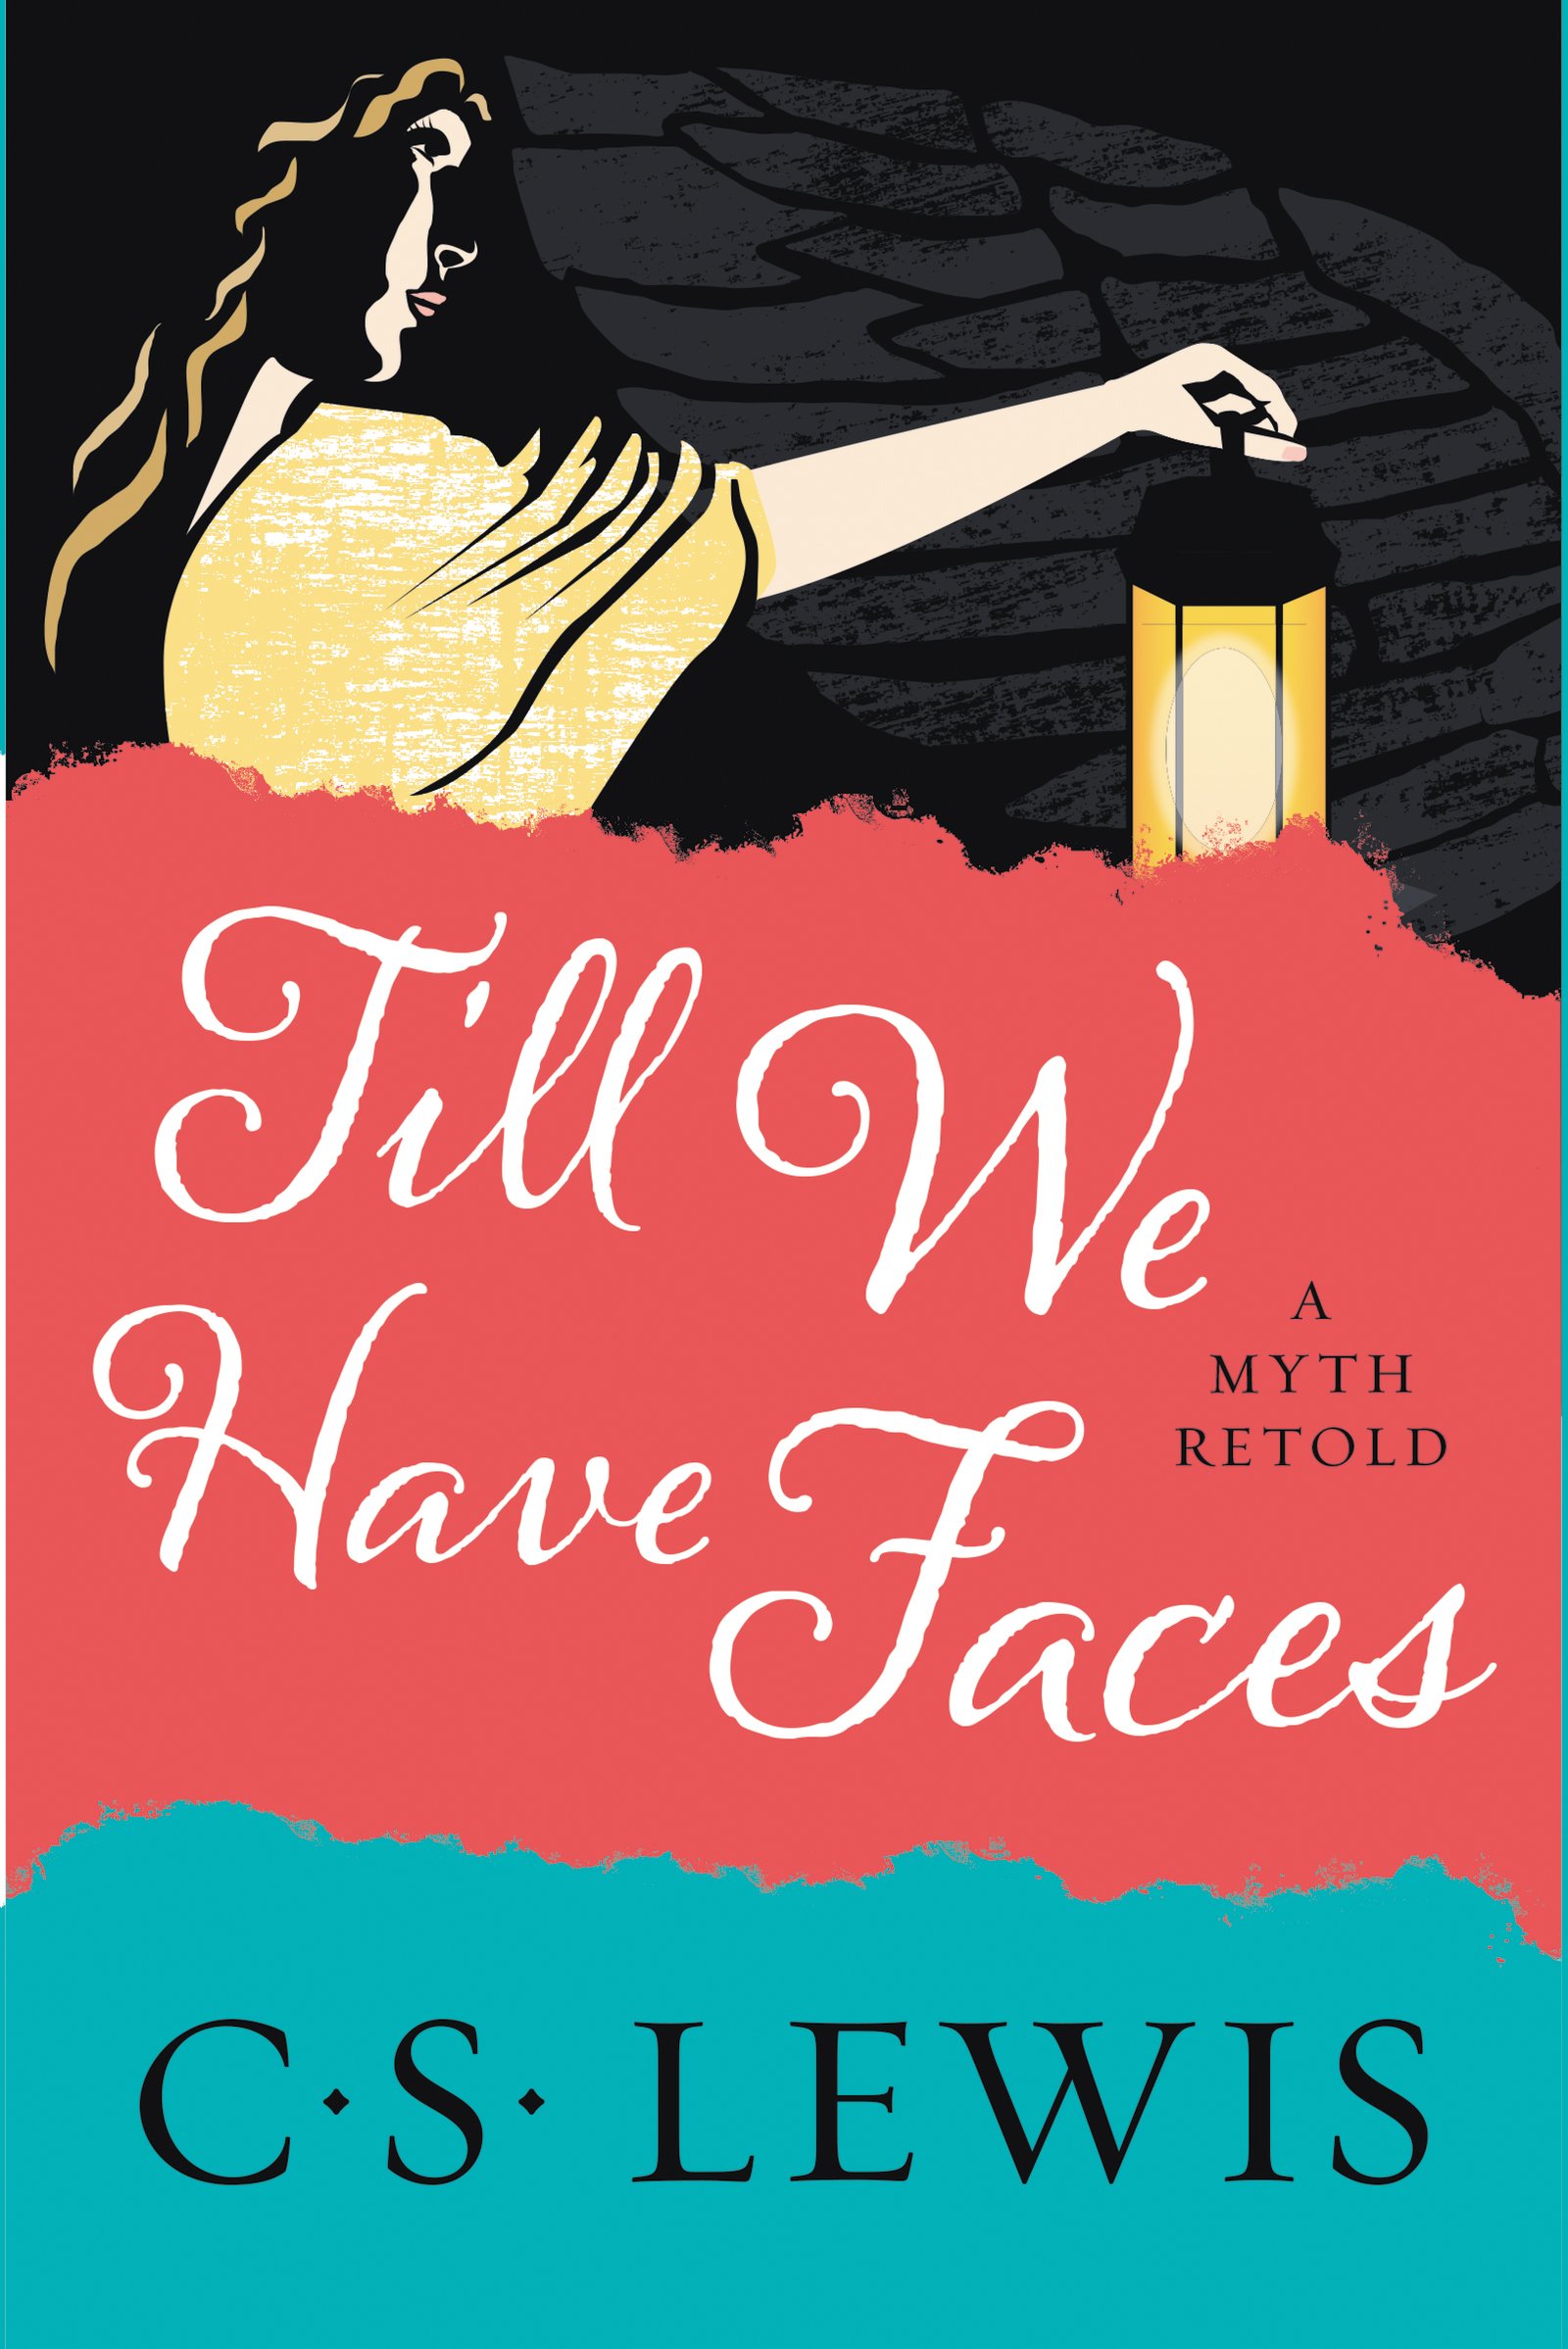 C.S. Lewis: Till We Have Faces: A Myth Retold [Kindle Edition] $2 ~ Amazon